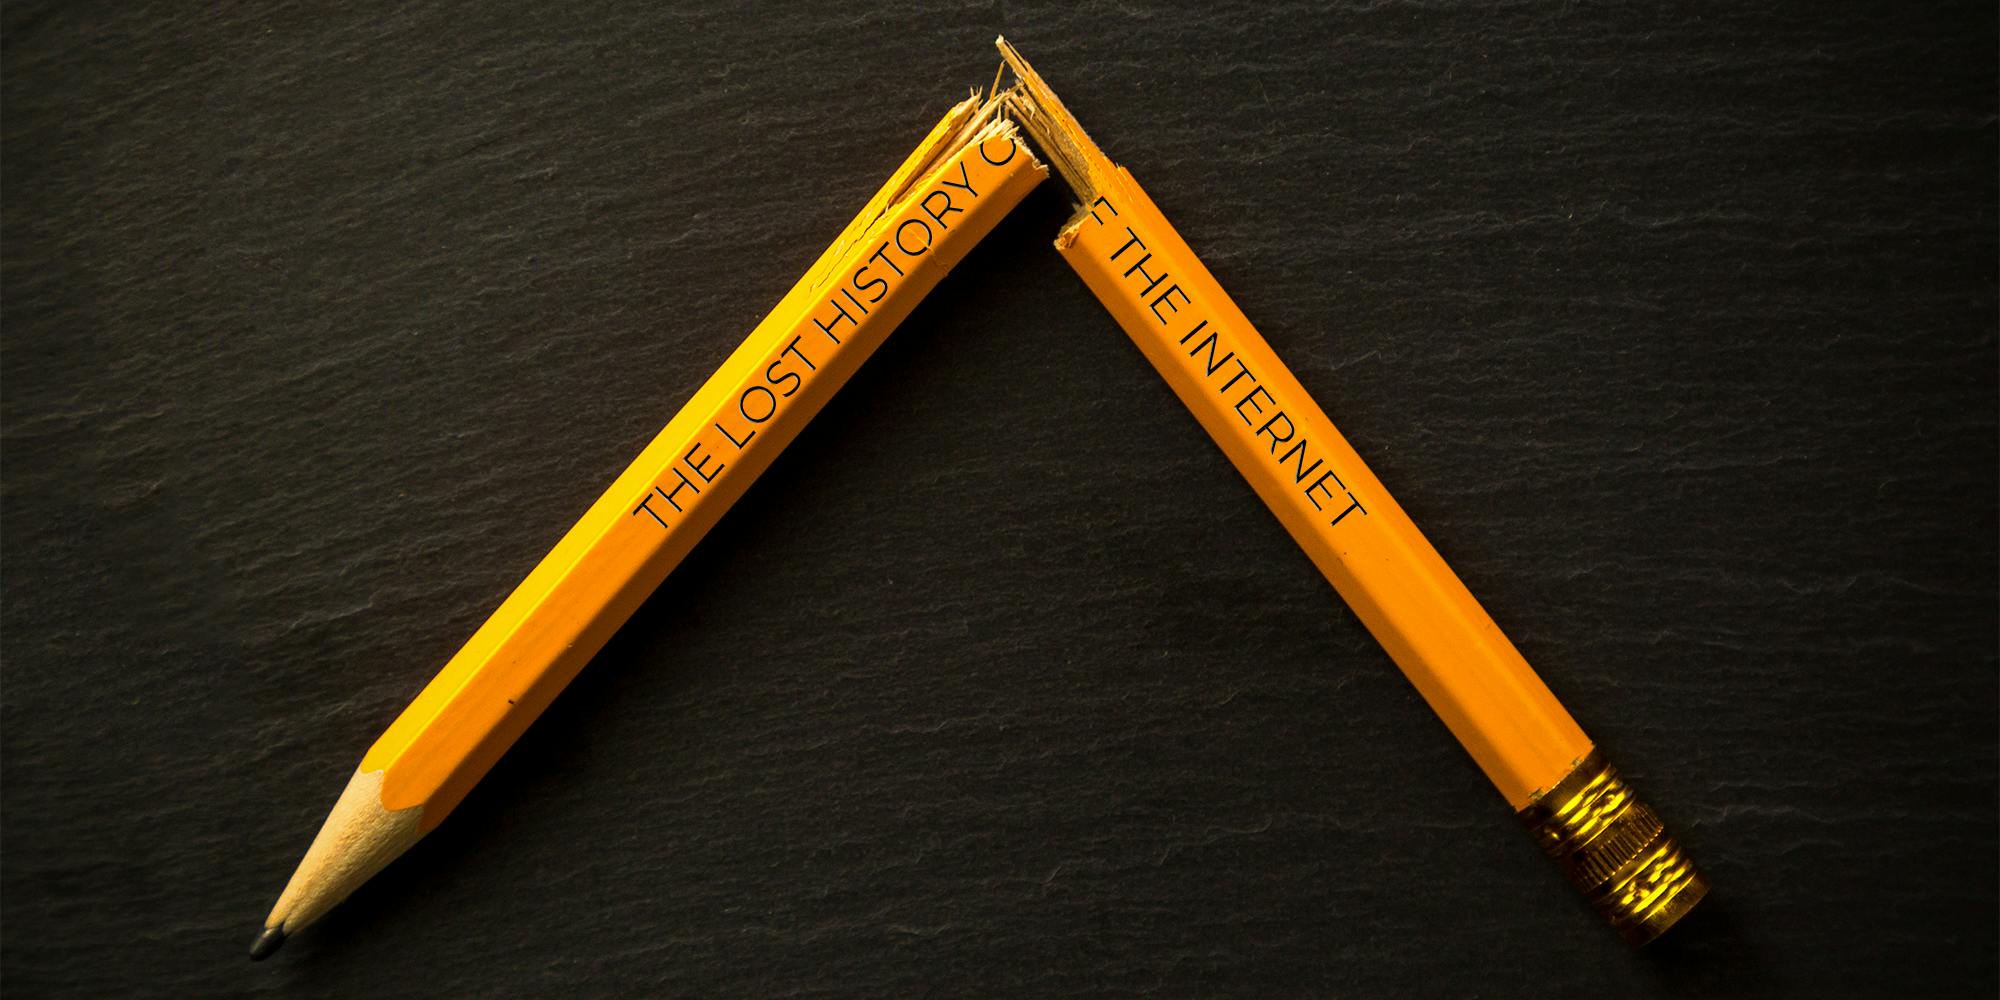 Broken pencil with phrase "The Lost History of the Internet" imprinted on the side